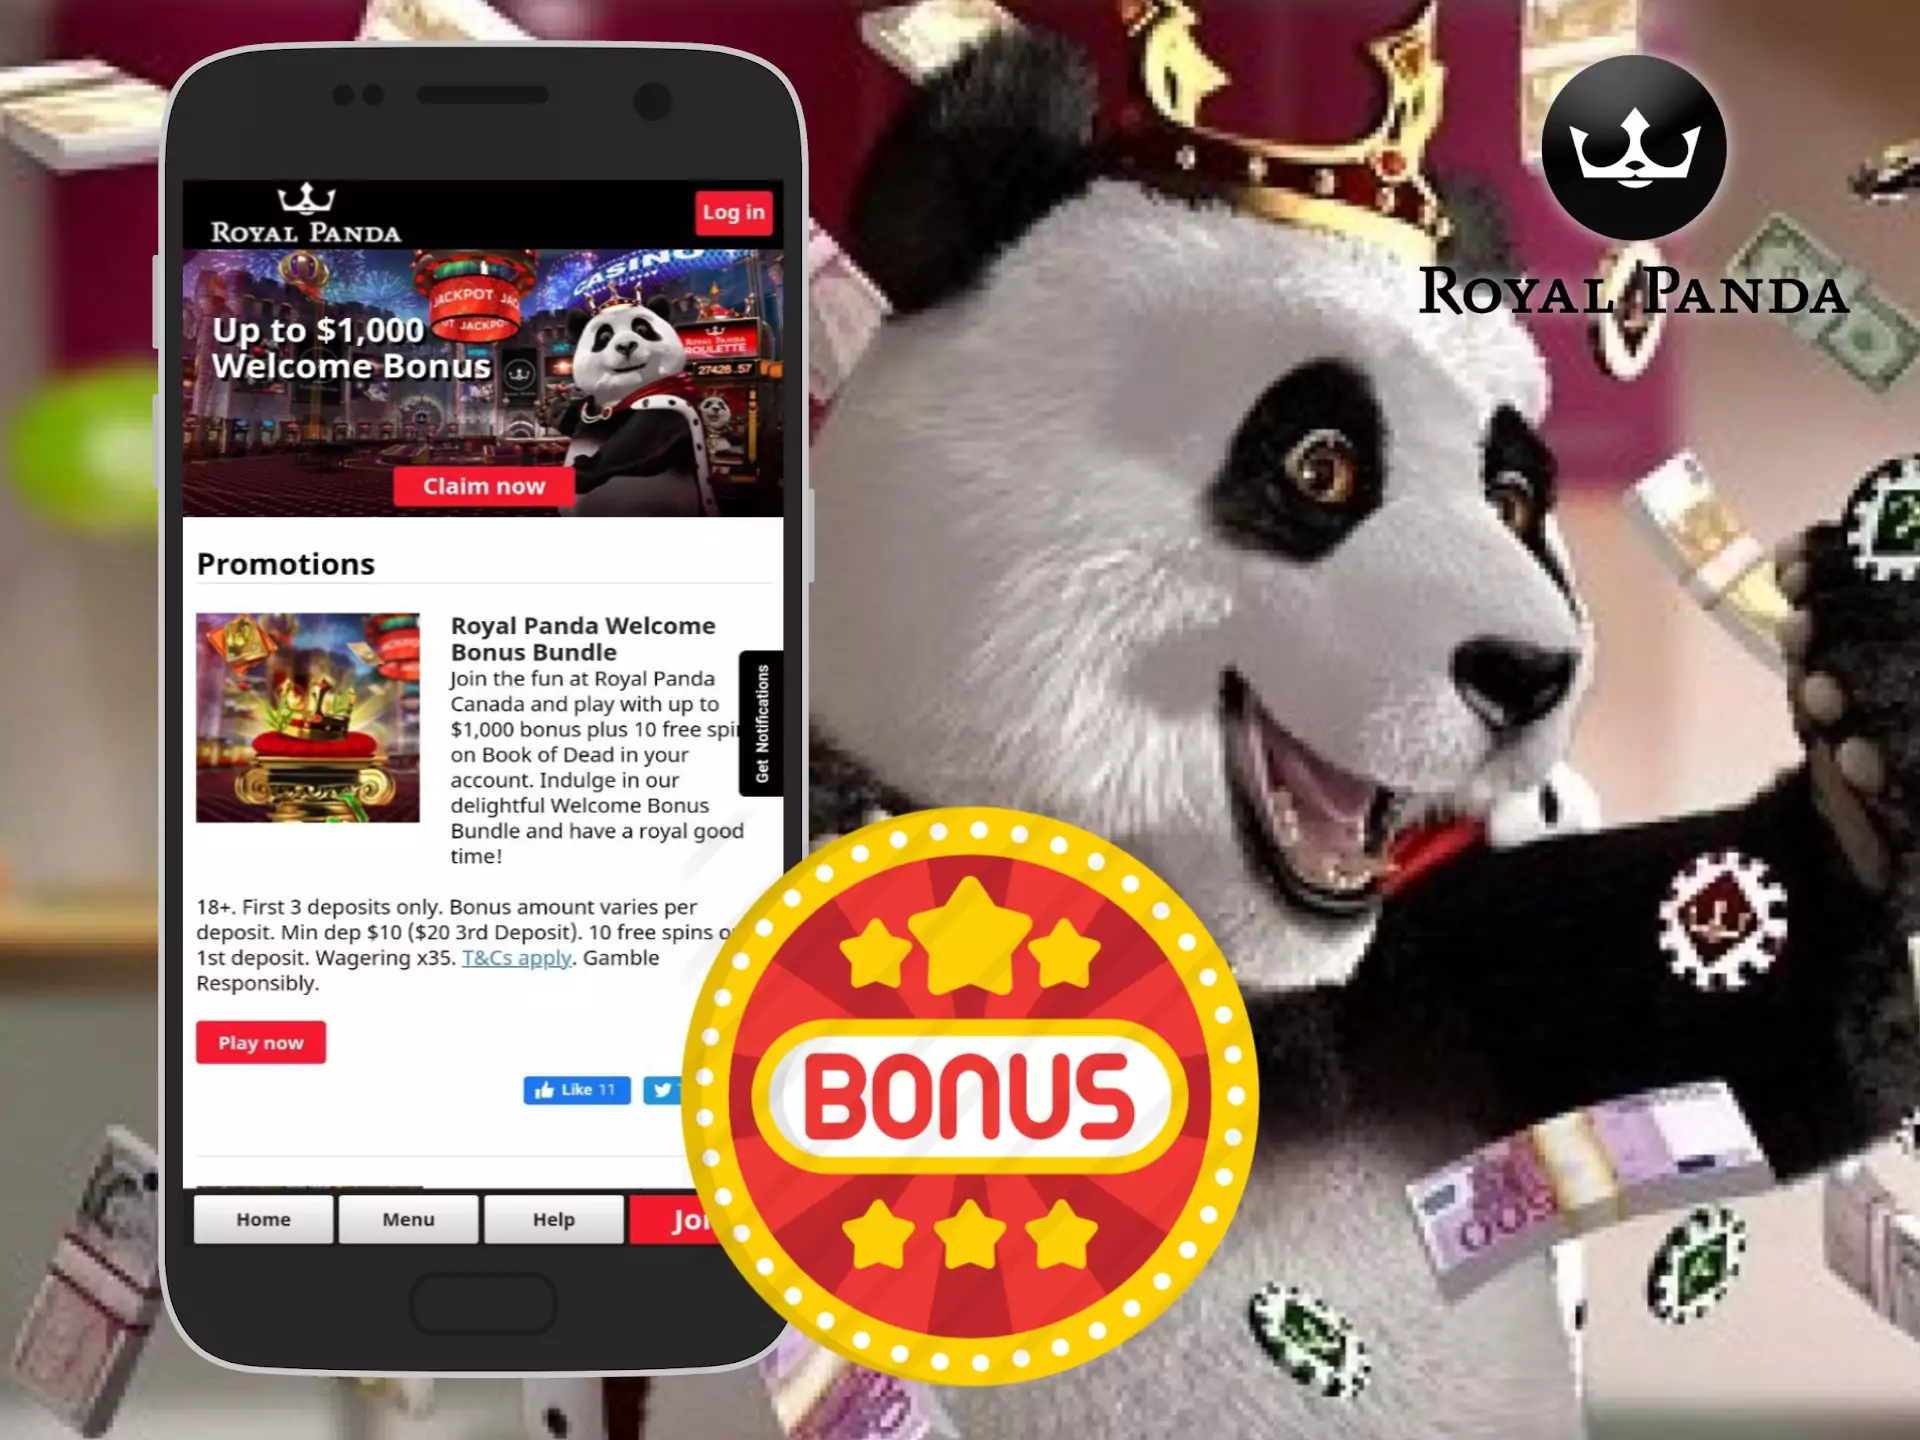 There are a lot of promos and bonuses for both new and regular players at Royal Panda.